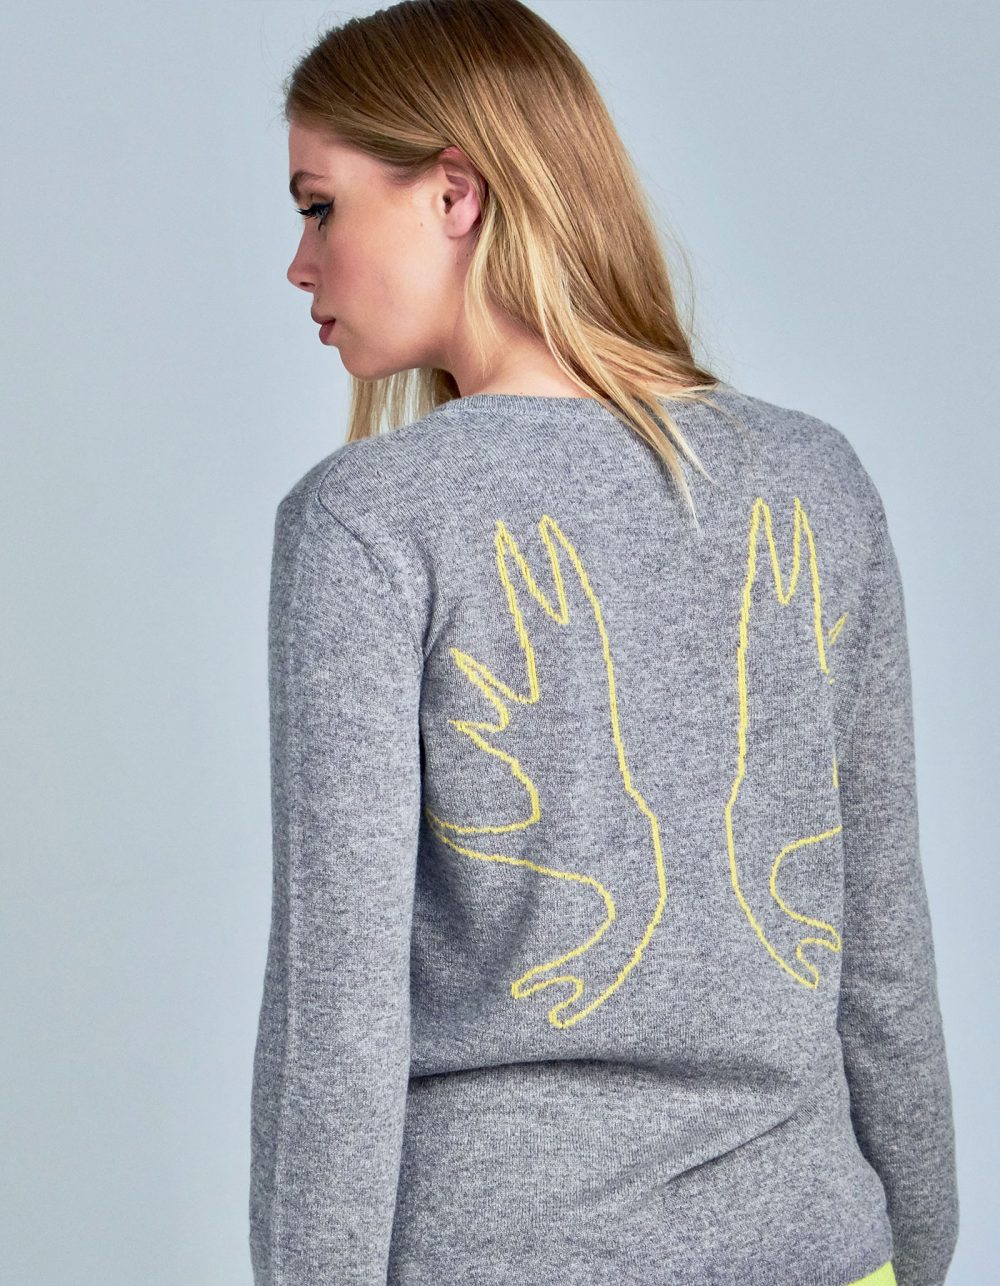 Back view of an Antlers cashmere jumper, part of the malin darlin designer cashmere knitwear collection.